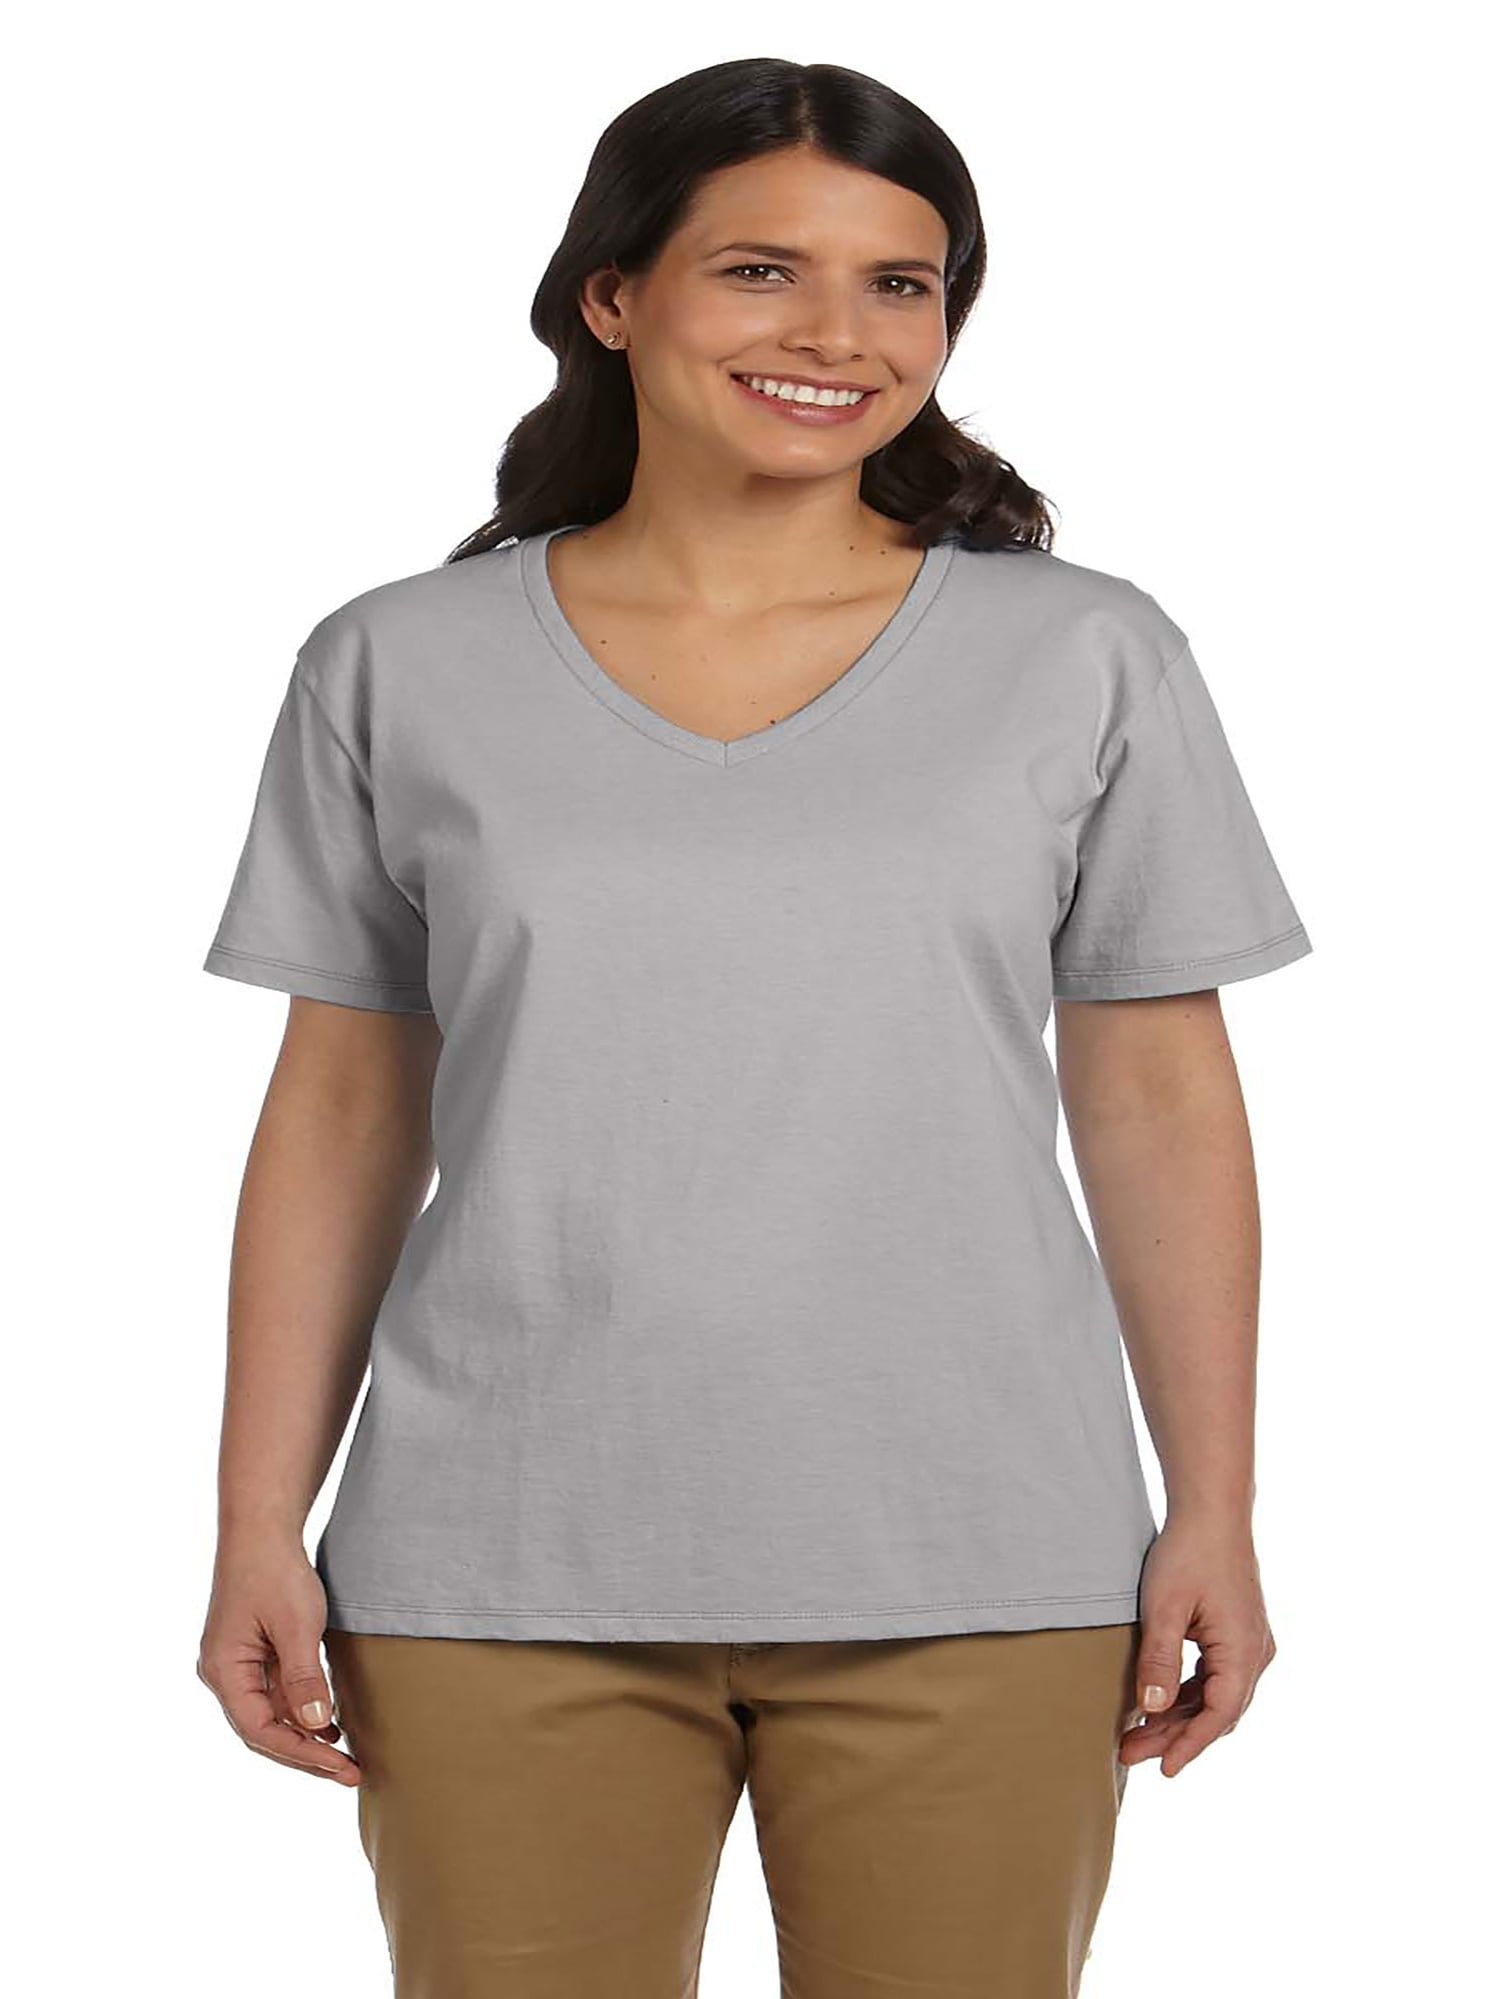 Hanes Relaxed Fit Women's ComfortSoft® V-neck T-Shirt, Style 5780 -  Walmart.com